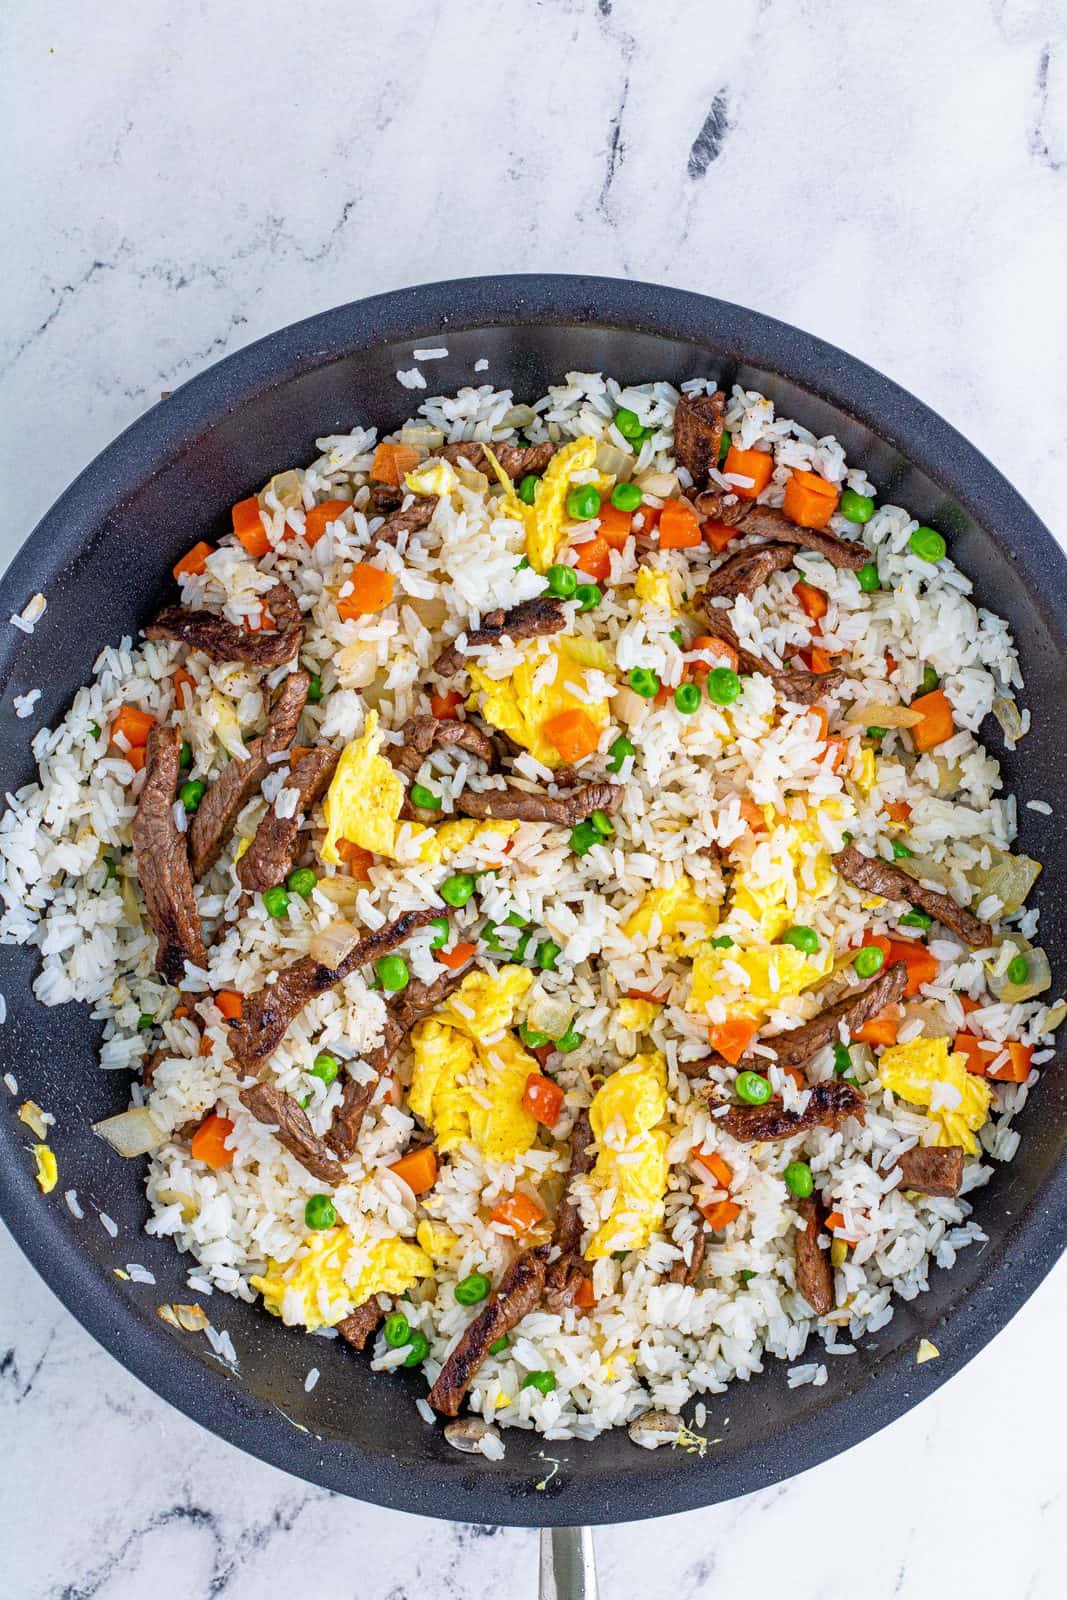 Beef, vegetables and eggs stirred into rice in pan.